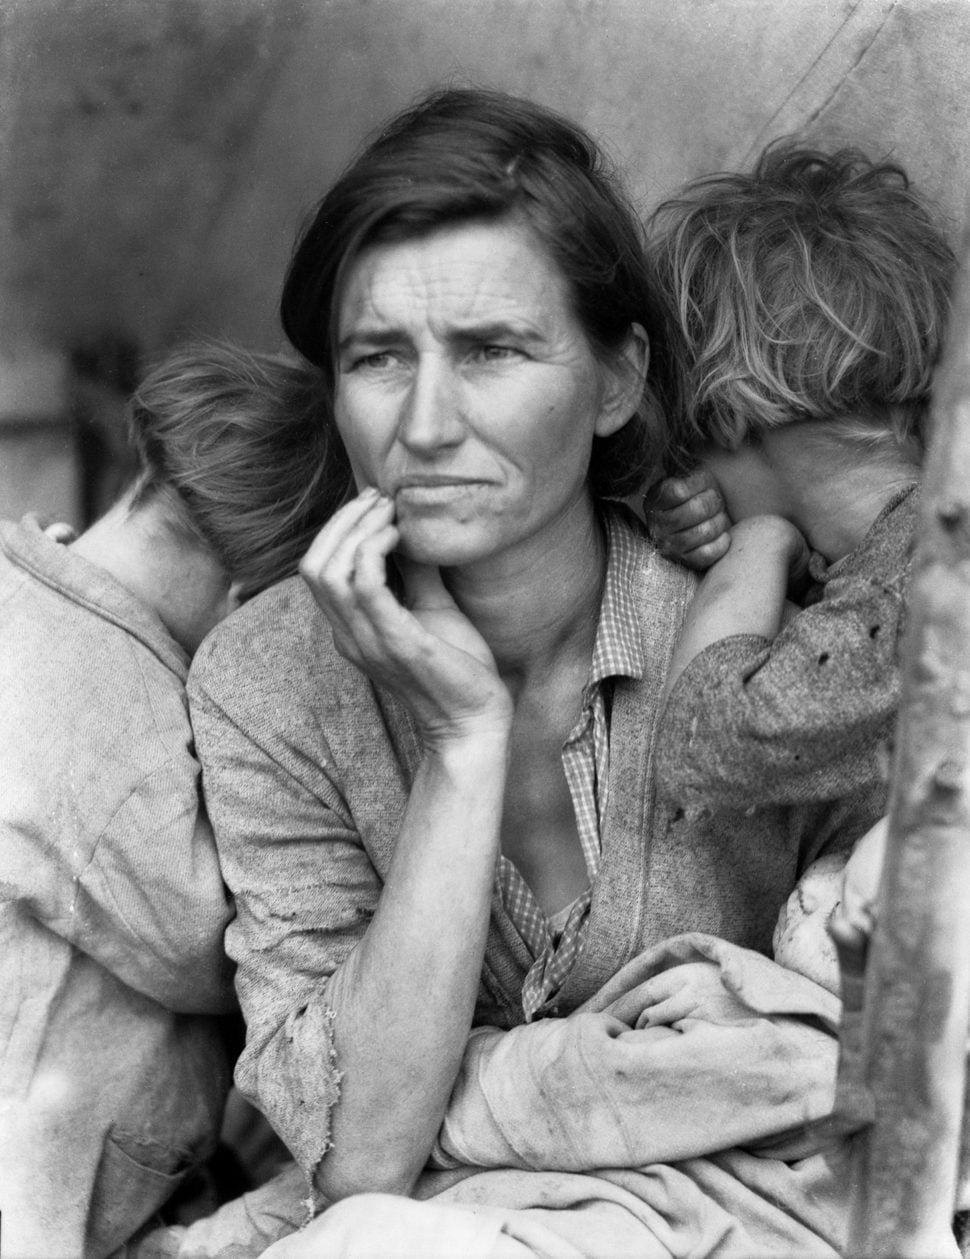 The Dorothea Lange Collection, Oakland Museum of California